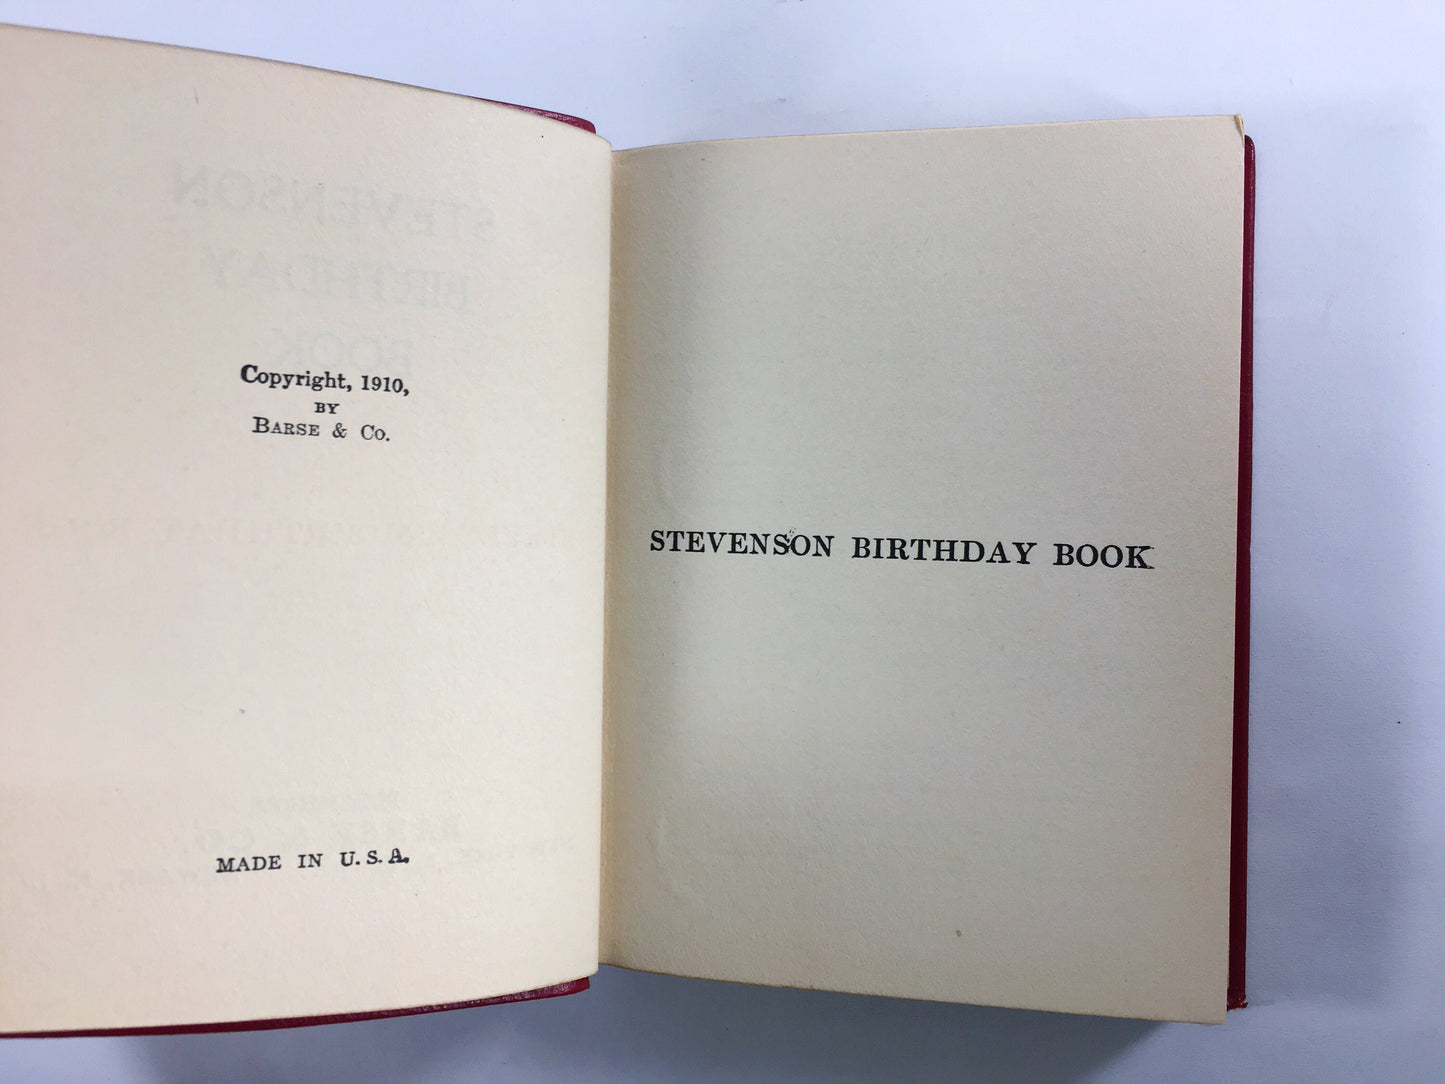 1904 small red antique Robert Louis Stevenson Birthday Book by Barse & Hopkins NY Gorgeous MINT vintage calendar gift. Quotes Quotations